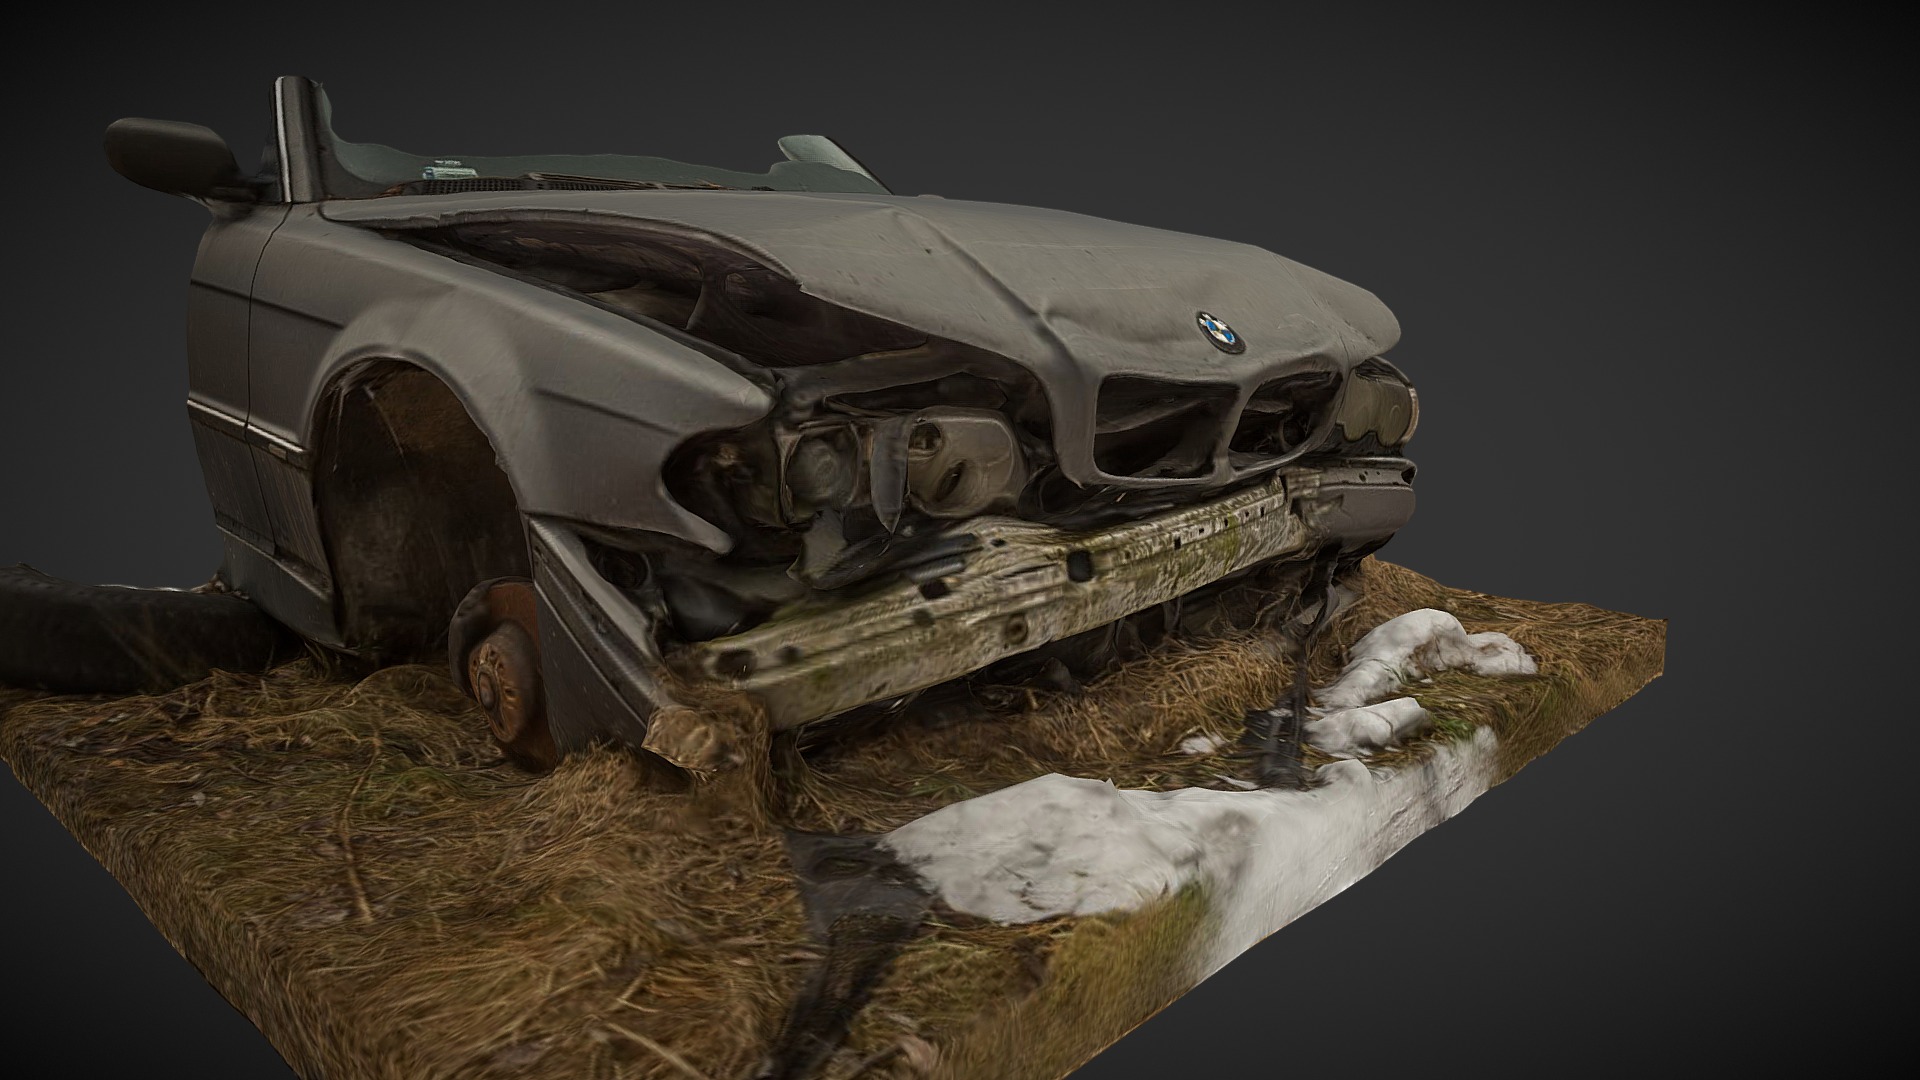 3D model BMW 7 Series’s crash - This is a 3D model of the BMW 7 Series's crash. The 3D model is about a car with a flat tire.